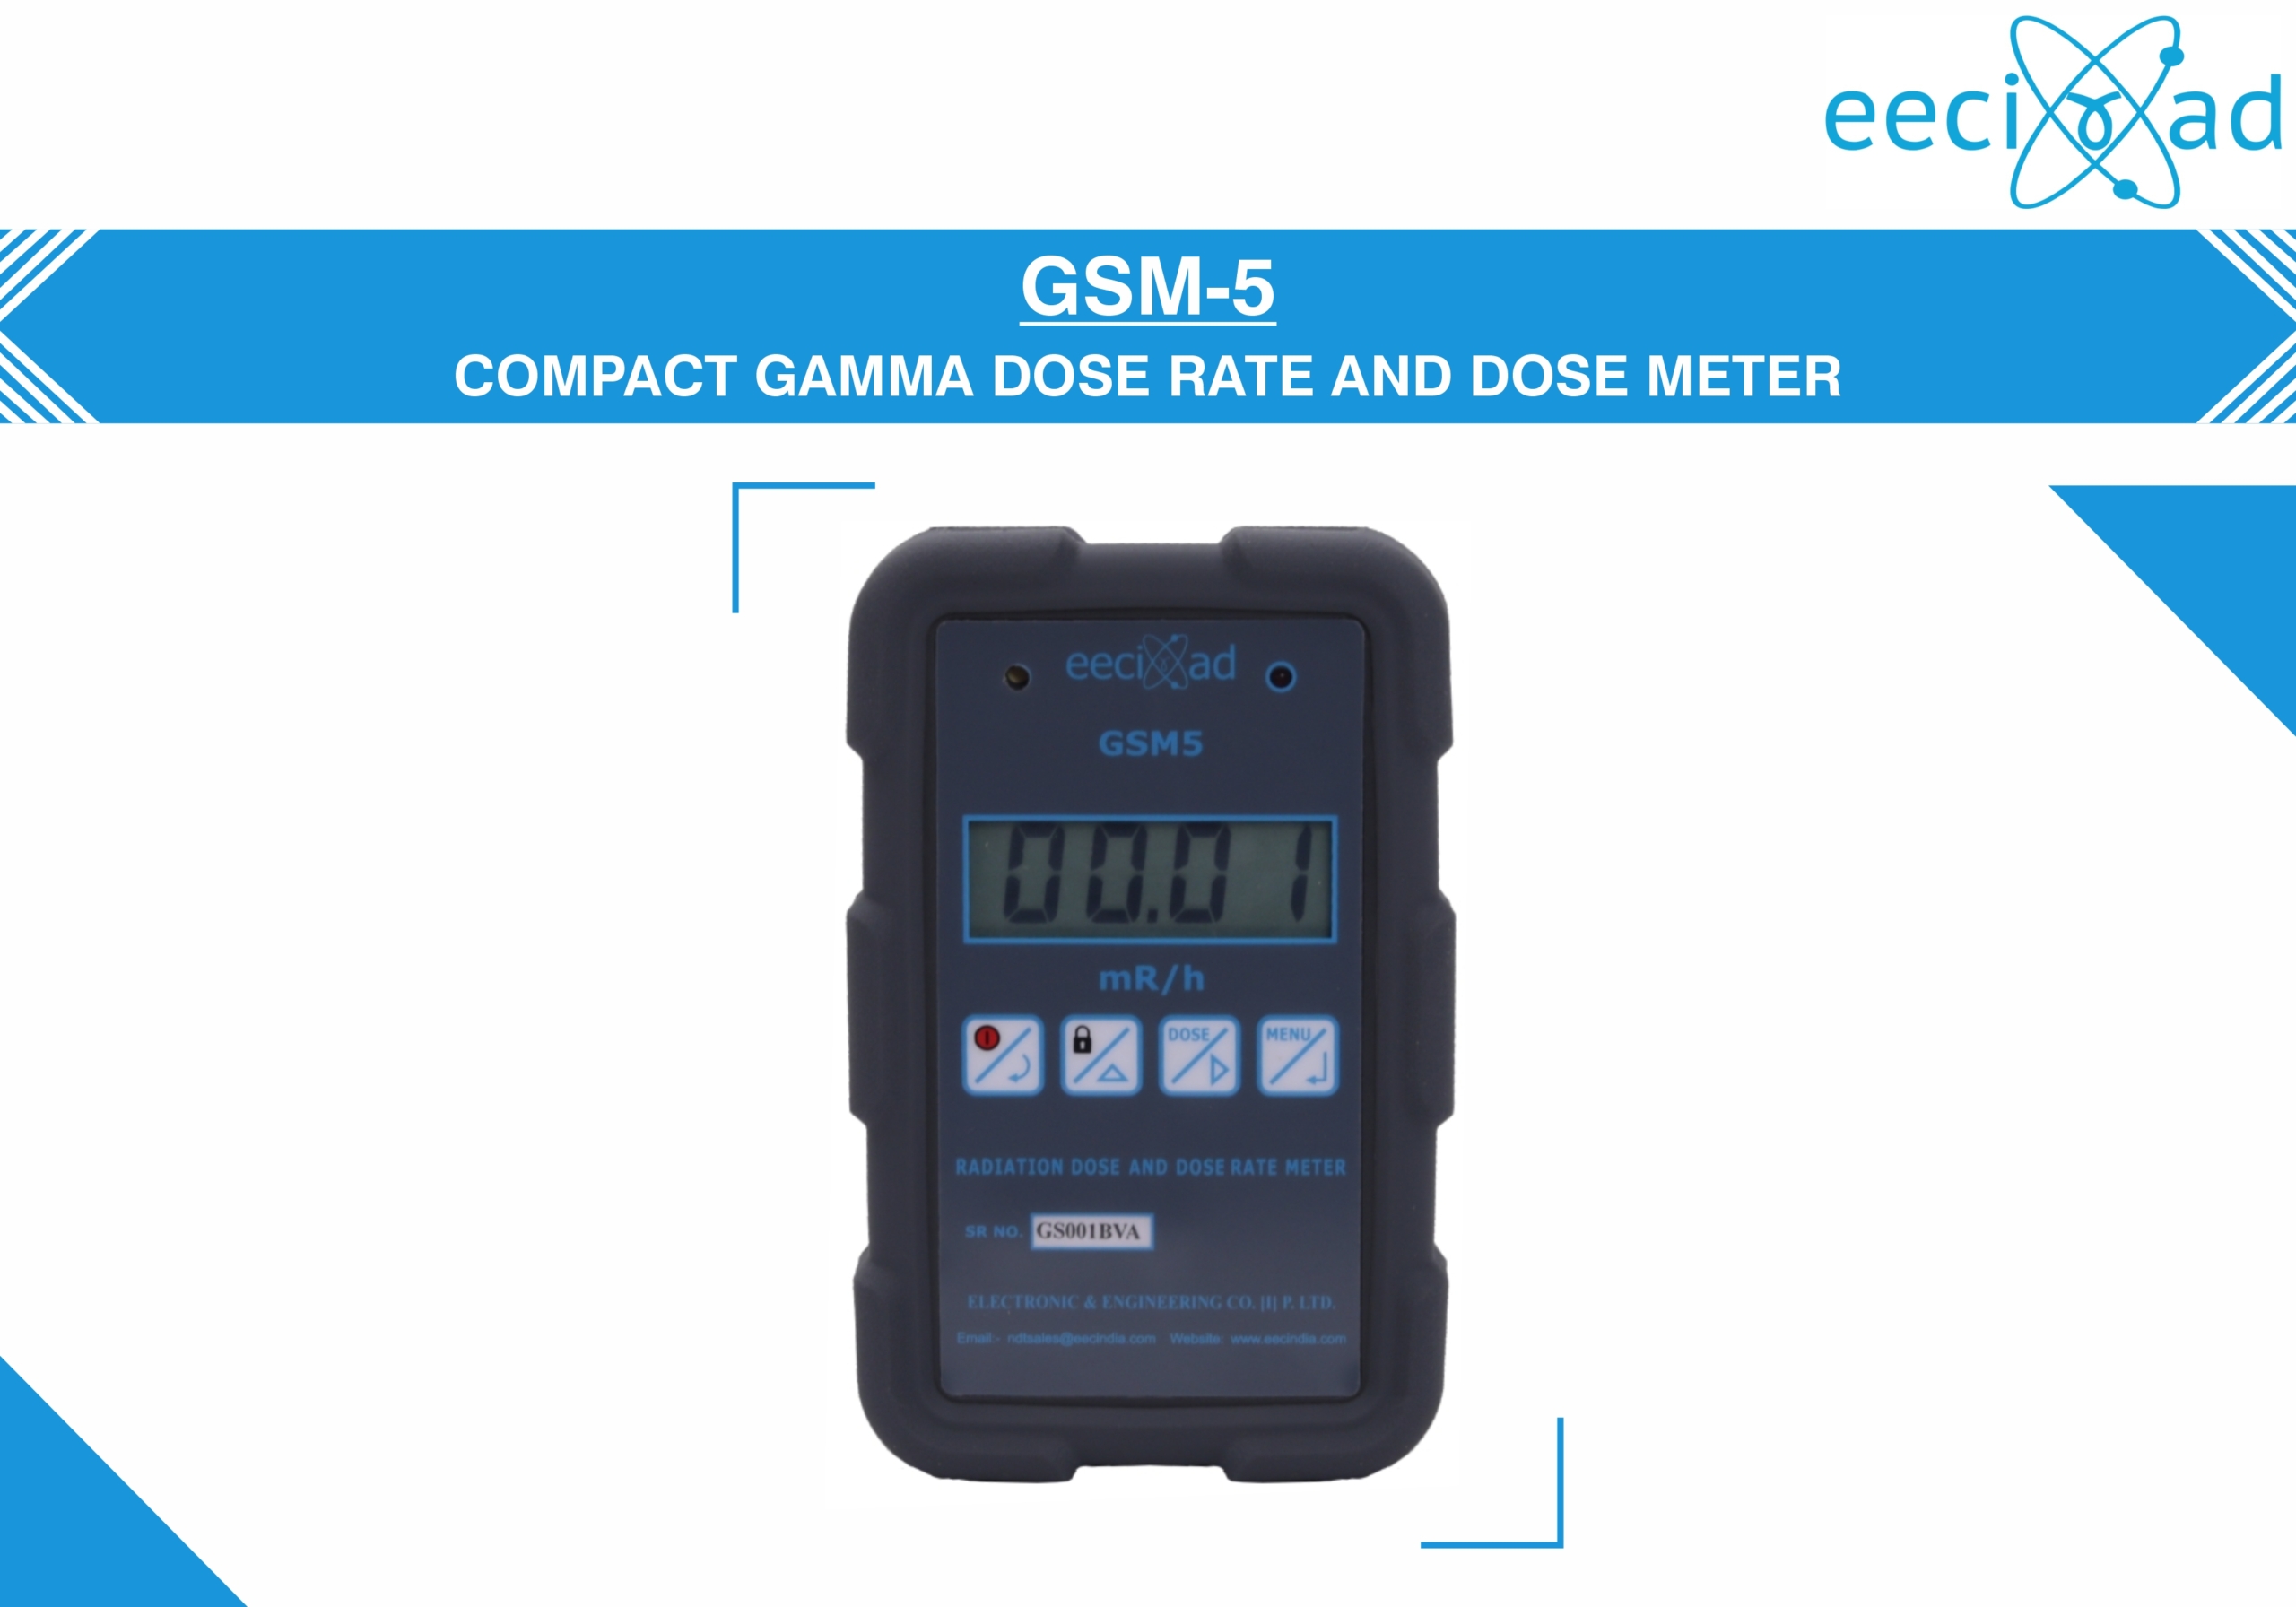 GSM-5-COMPACT GAMMA DOSE RATE AND DOSE METER